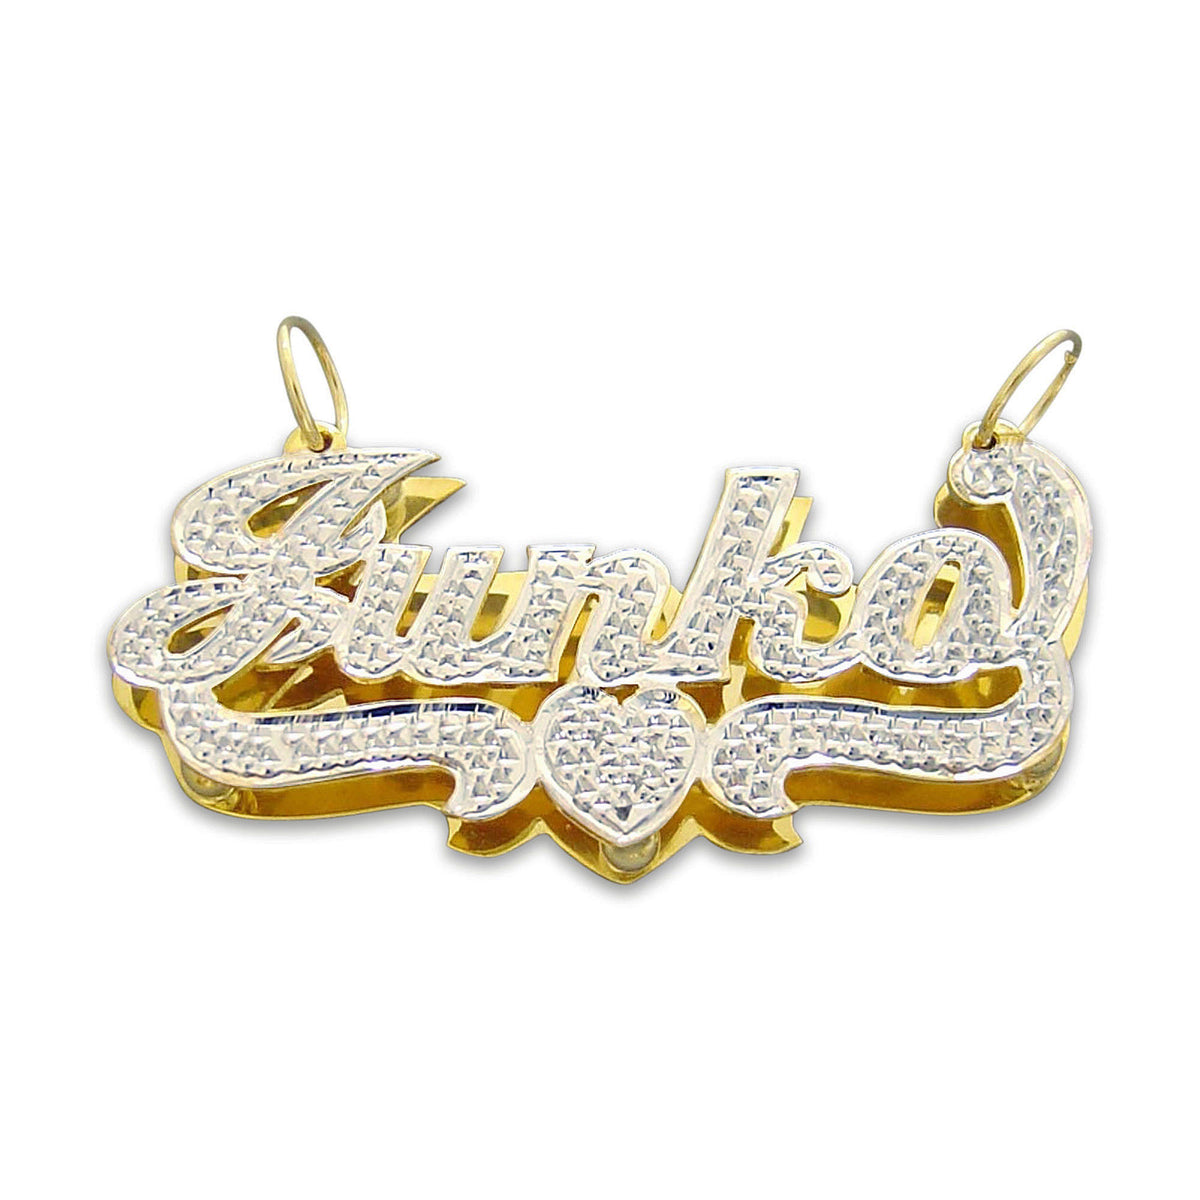 Personalized Jewelry Customized 3D Double Plate Diamond Name Pendant Charm Solid 10k or 14k Gold ND34